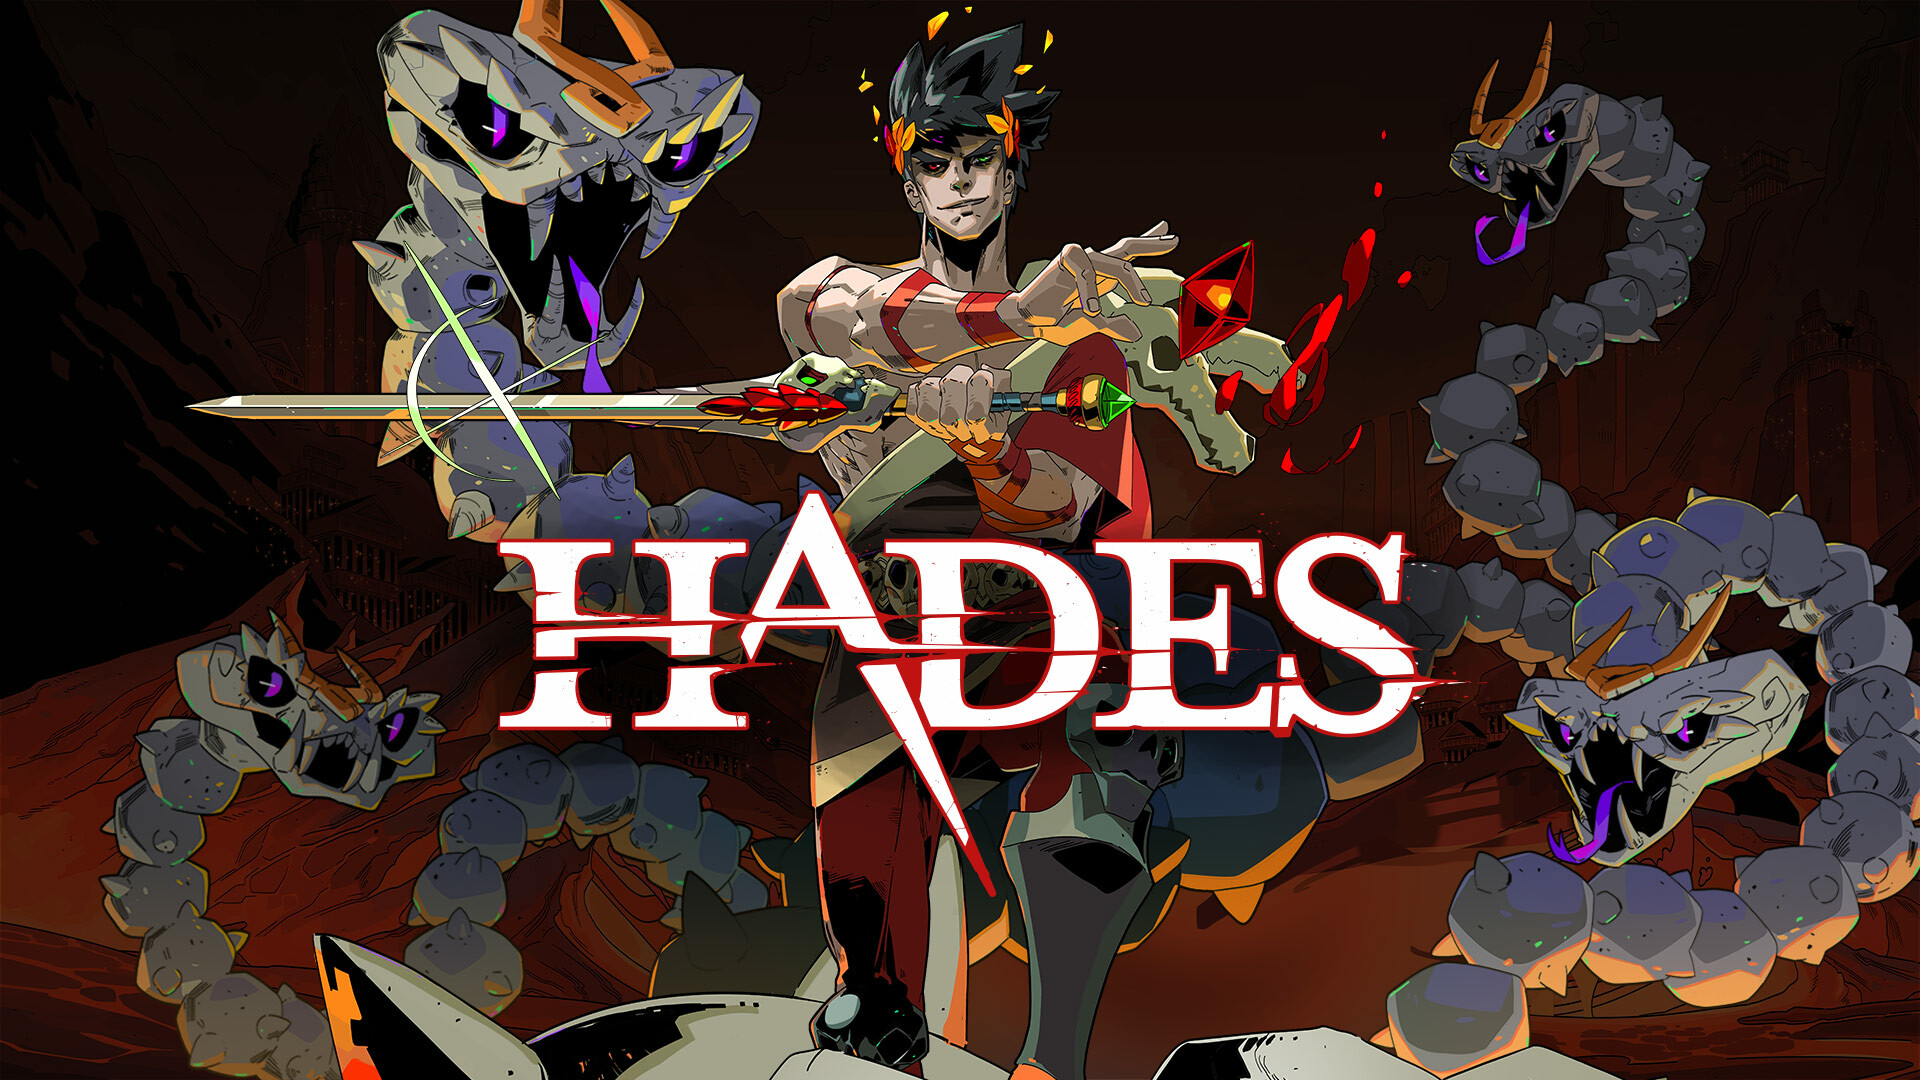 Hades: Characters in the game are all taken from Greek mythology, although some with tweaks to fit the story. 1920x1080 Full HD Wallpaper.